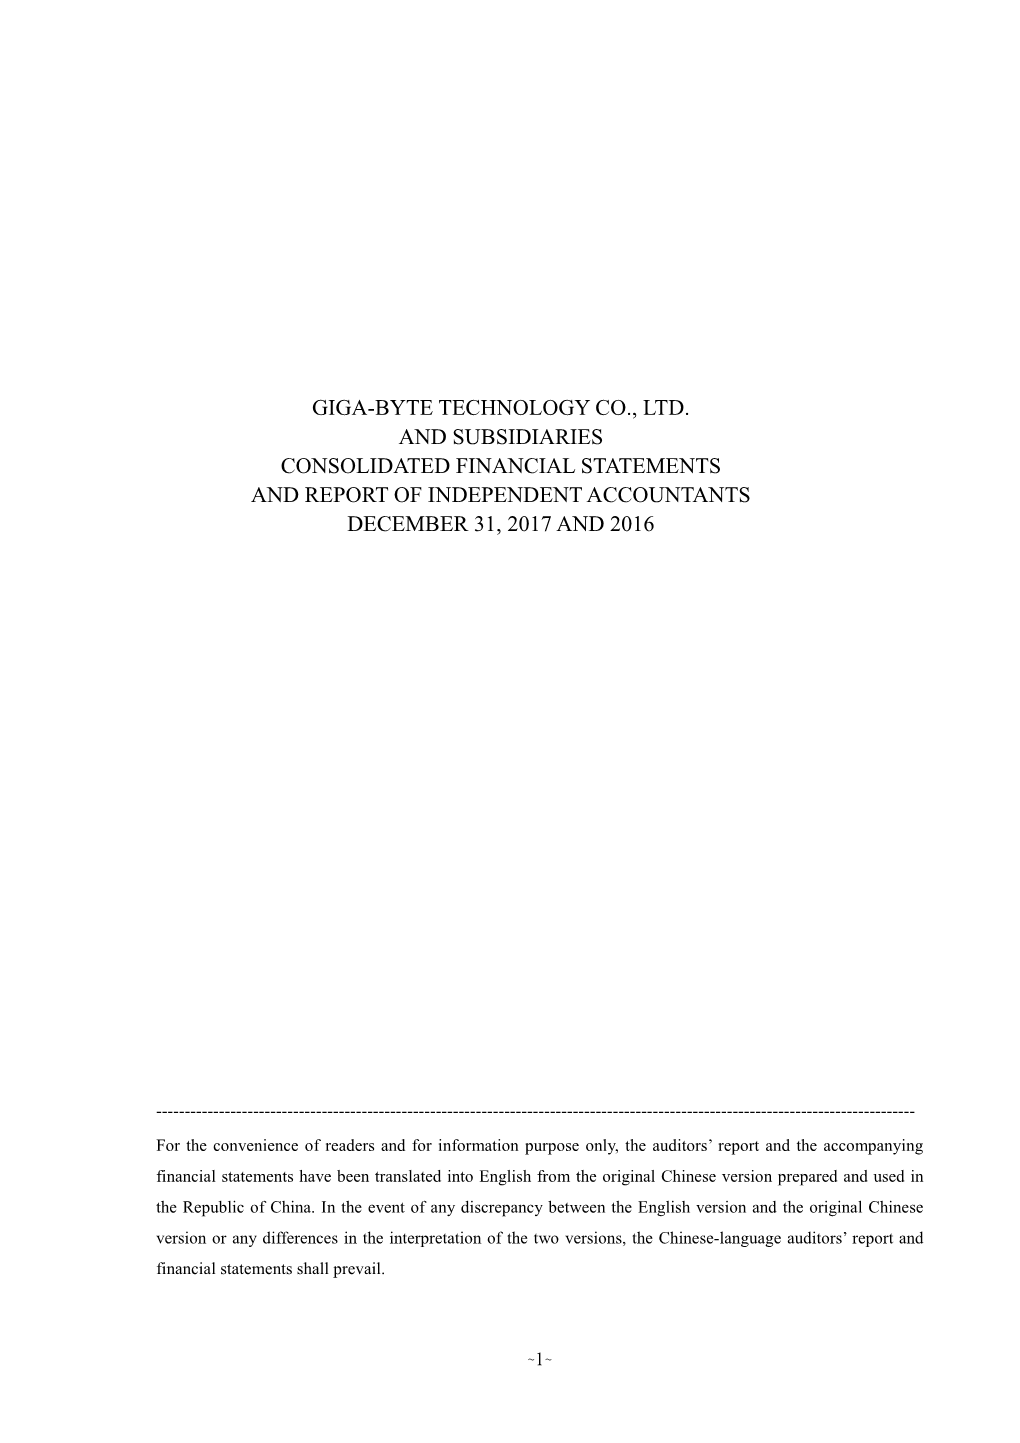 Giga-Byte Technology Co., Ltd. and Subsidiaries Consolidated Financial Statements and Report of Independent Accountants December 31, 2017 and 2016